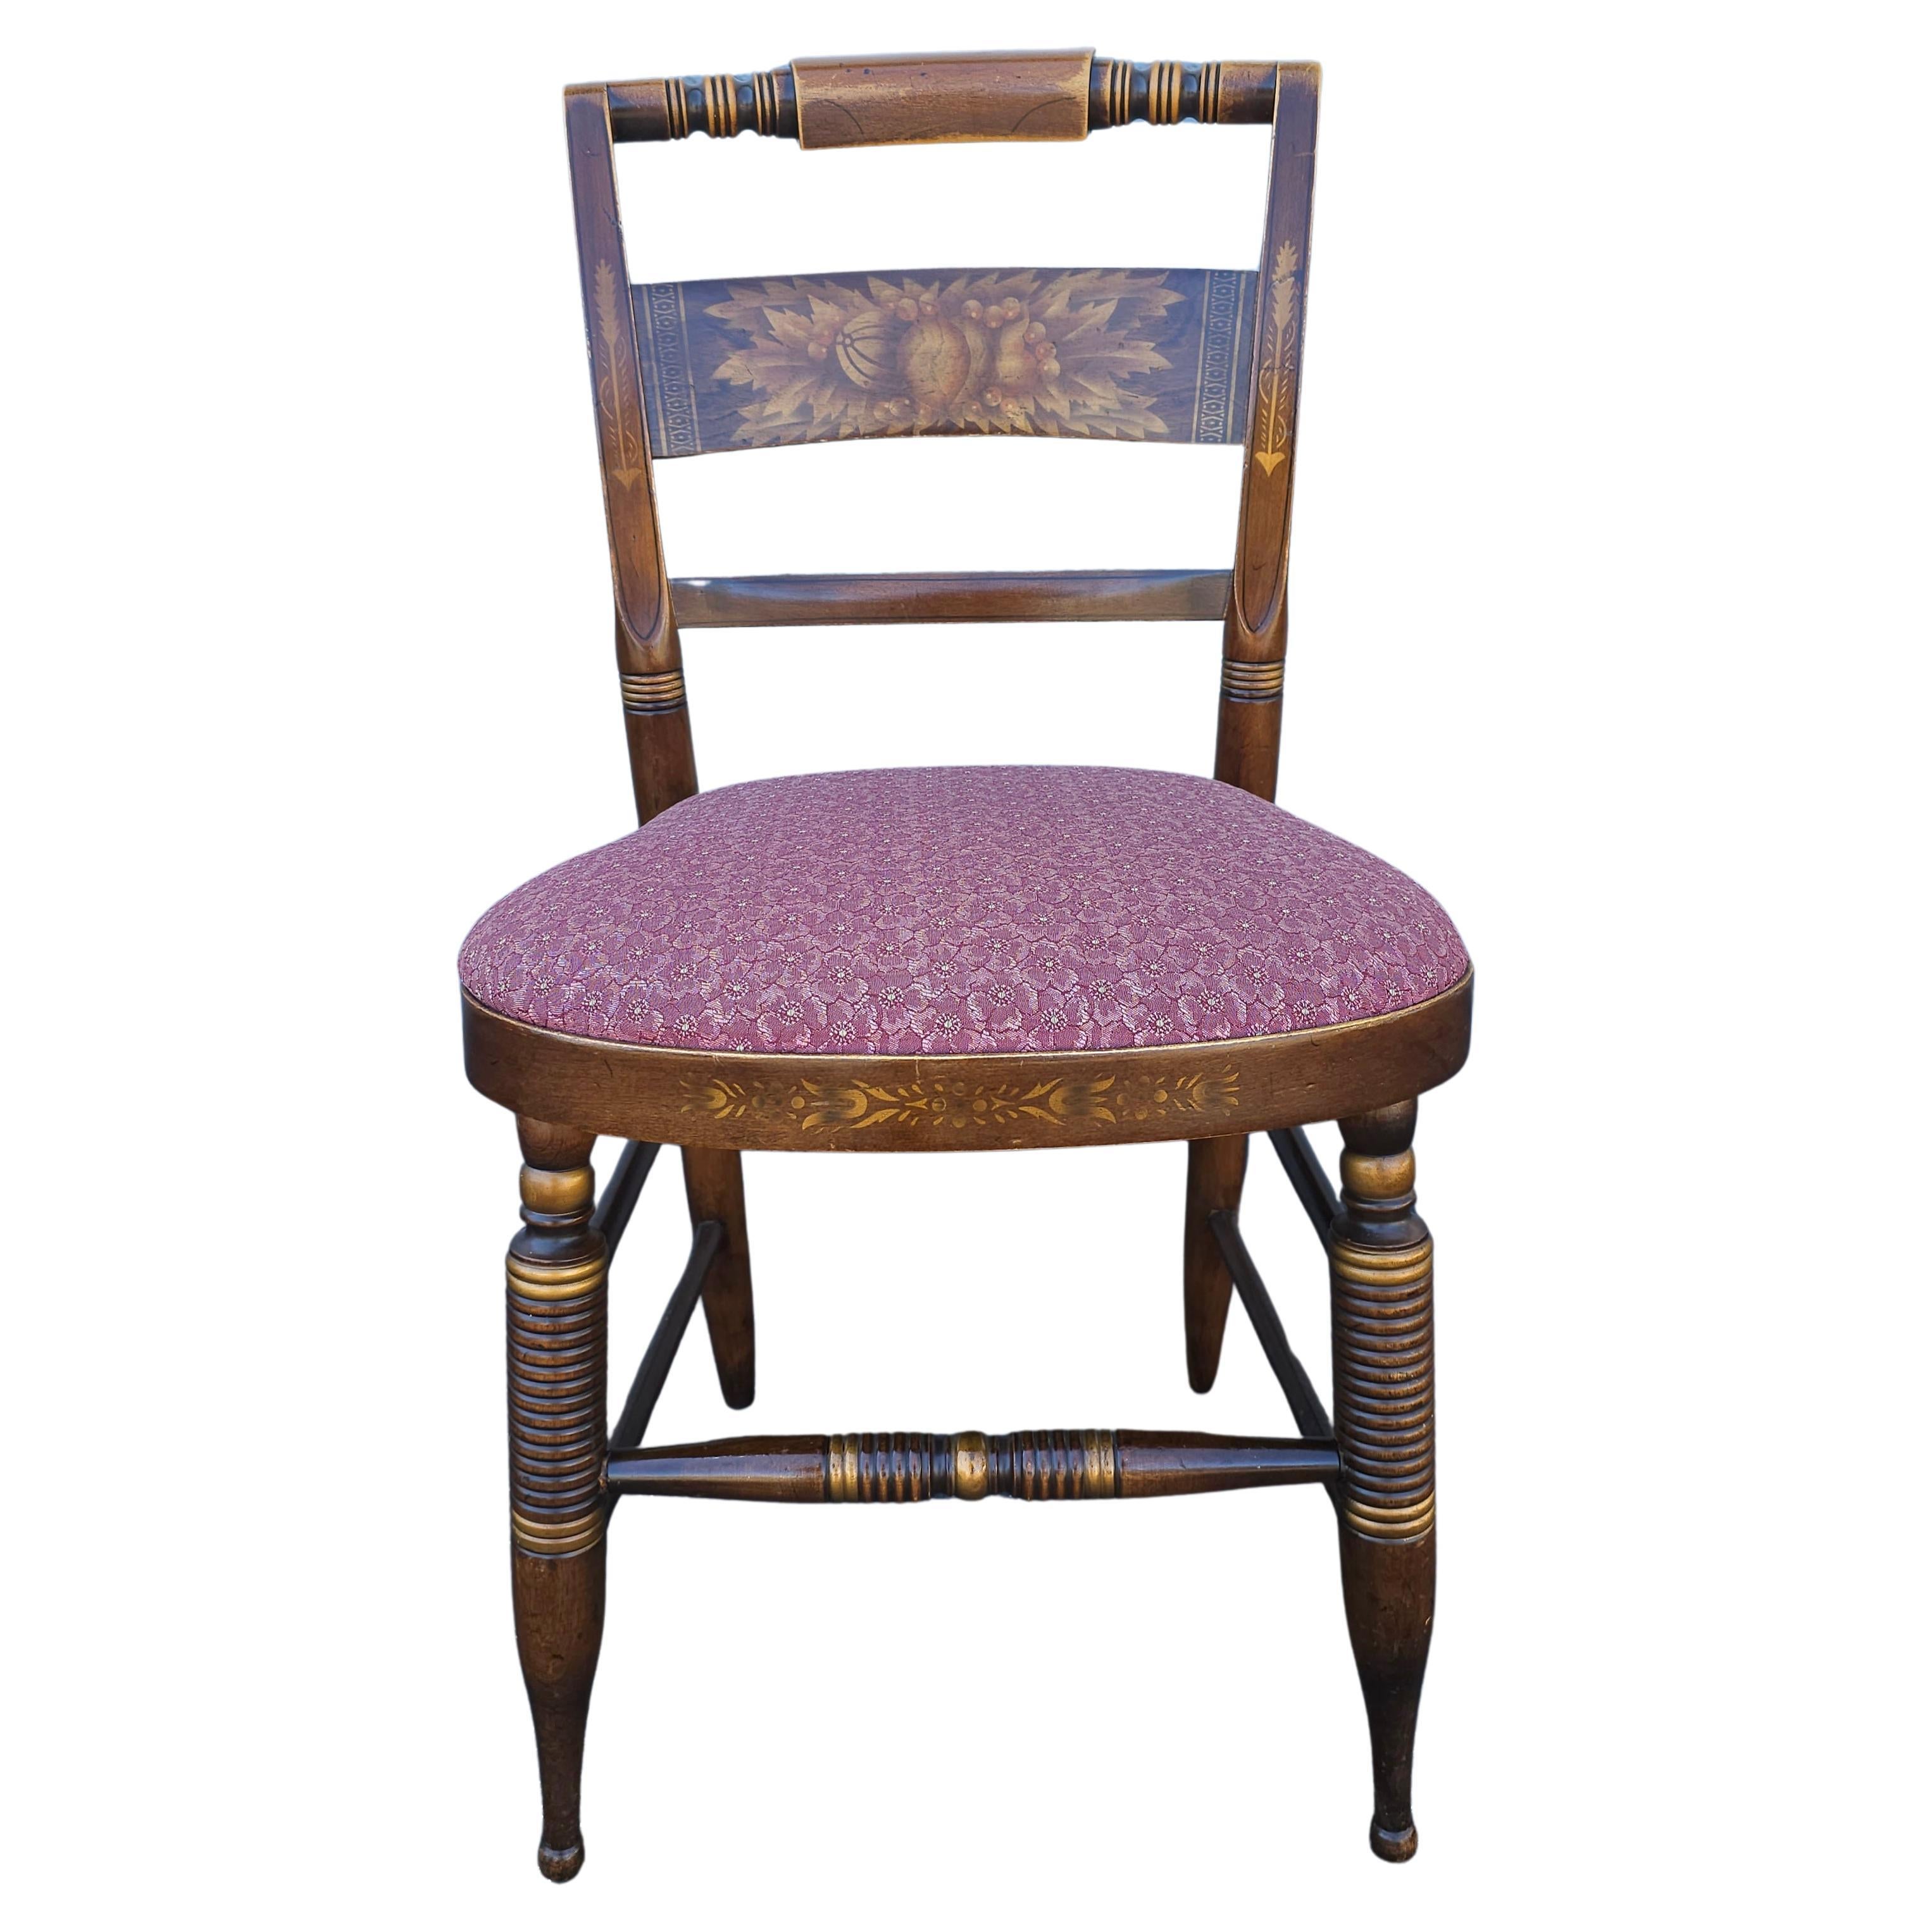 Late 20th C. Hitchcock Partial Gilt and Decorated Upholstered Seat Side Chair